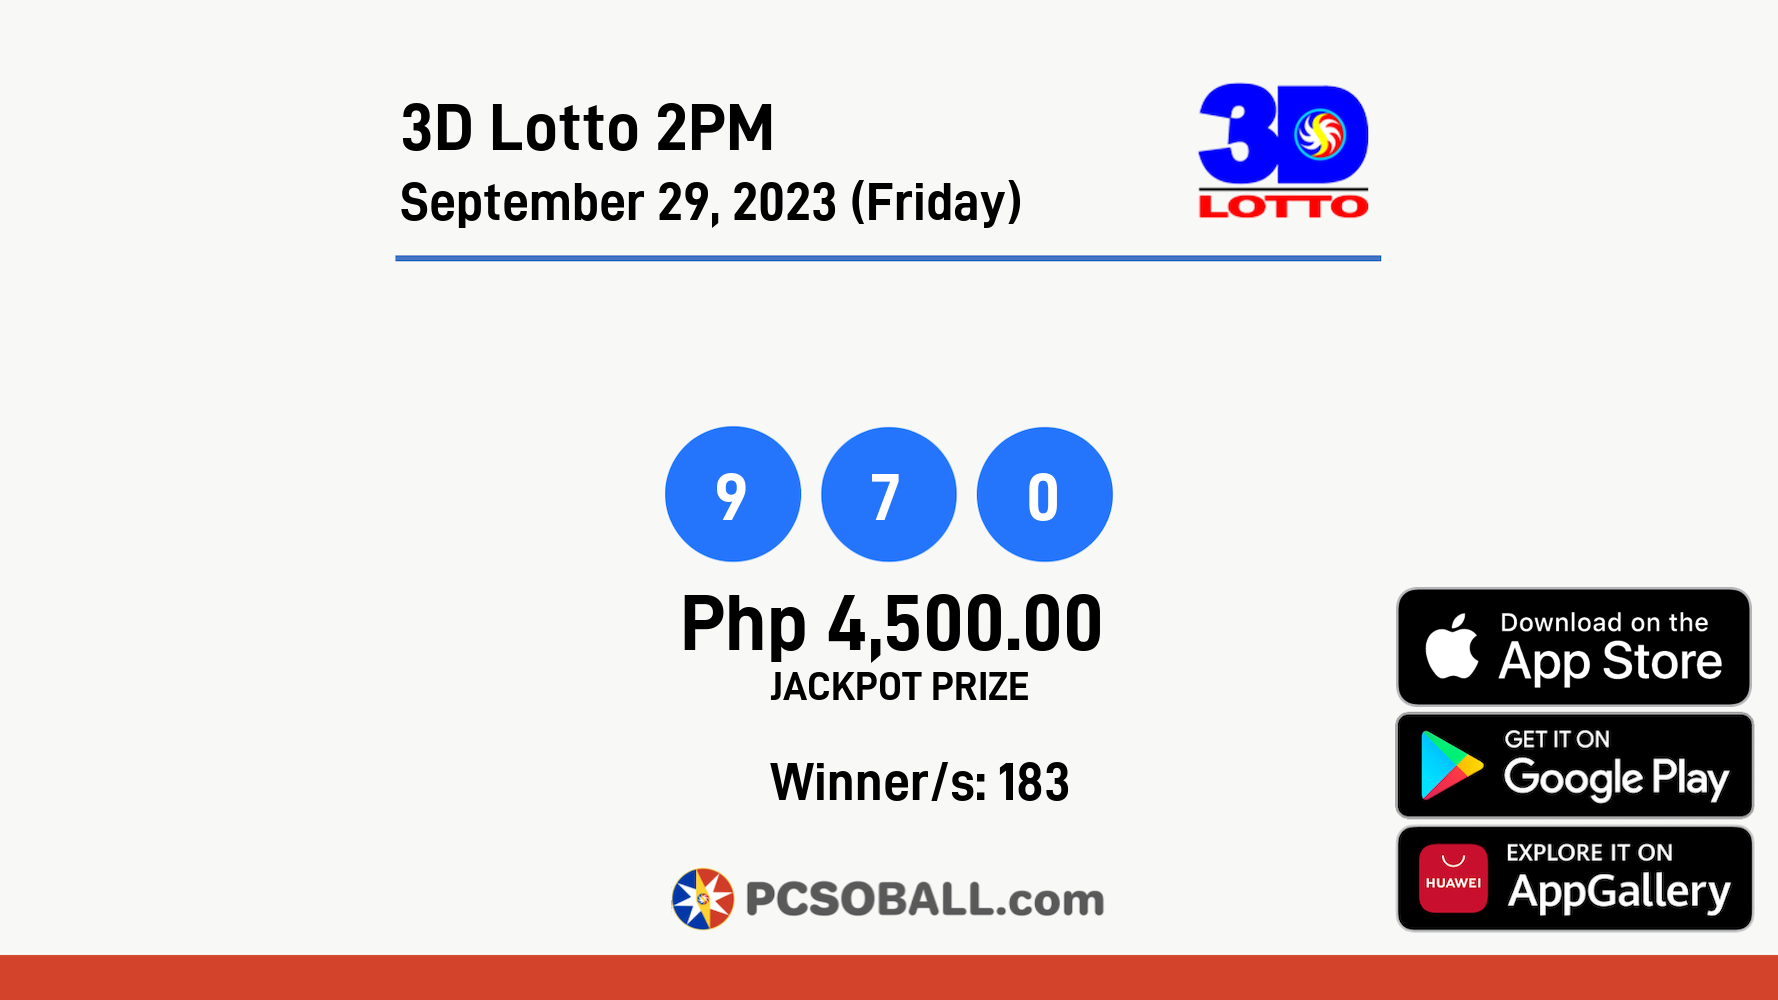 3D Lotto 2PM September 29, 2023 (Friday) Result